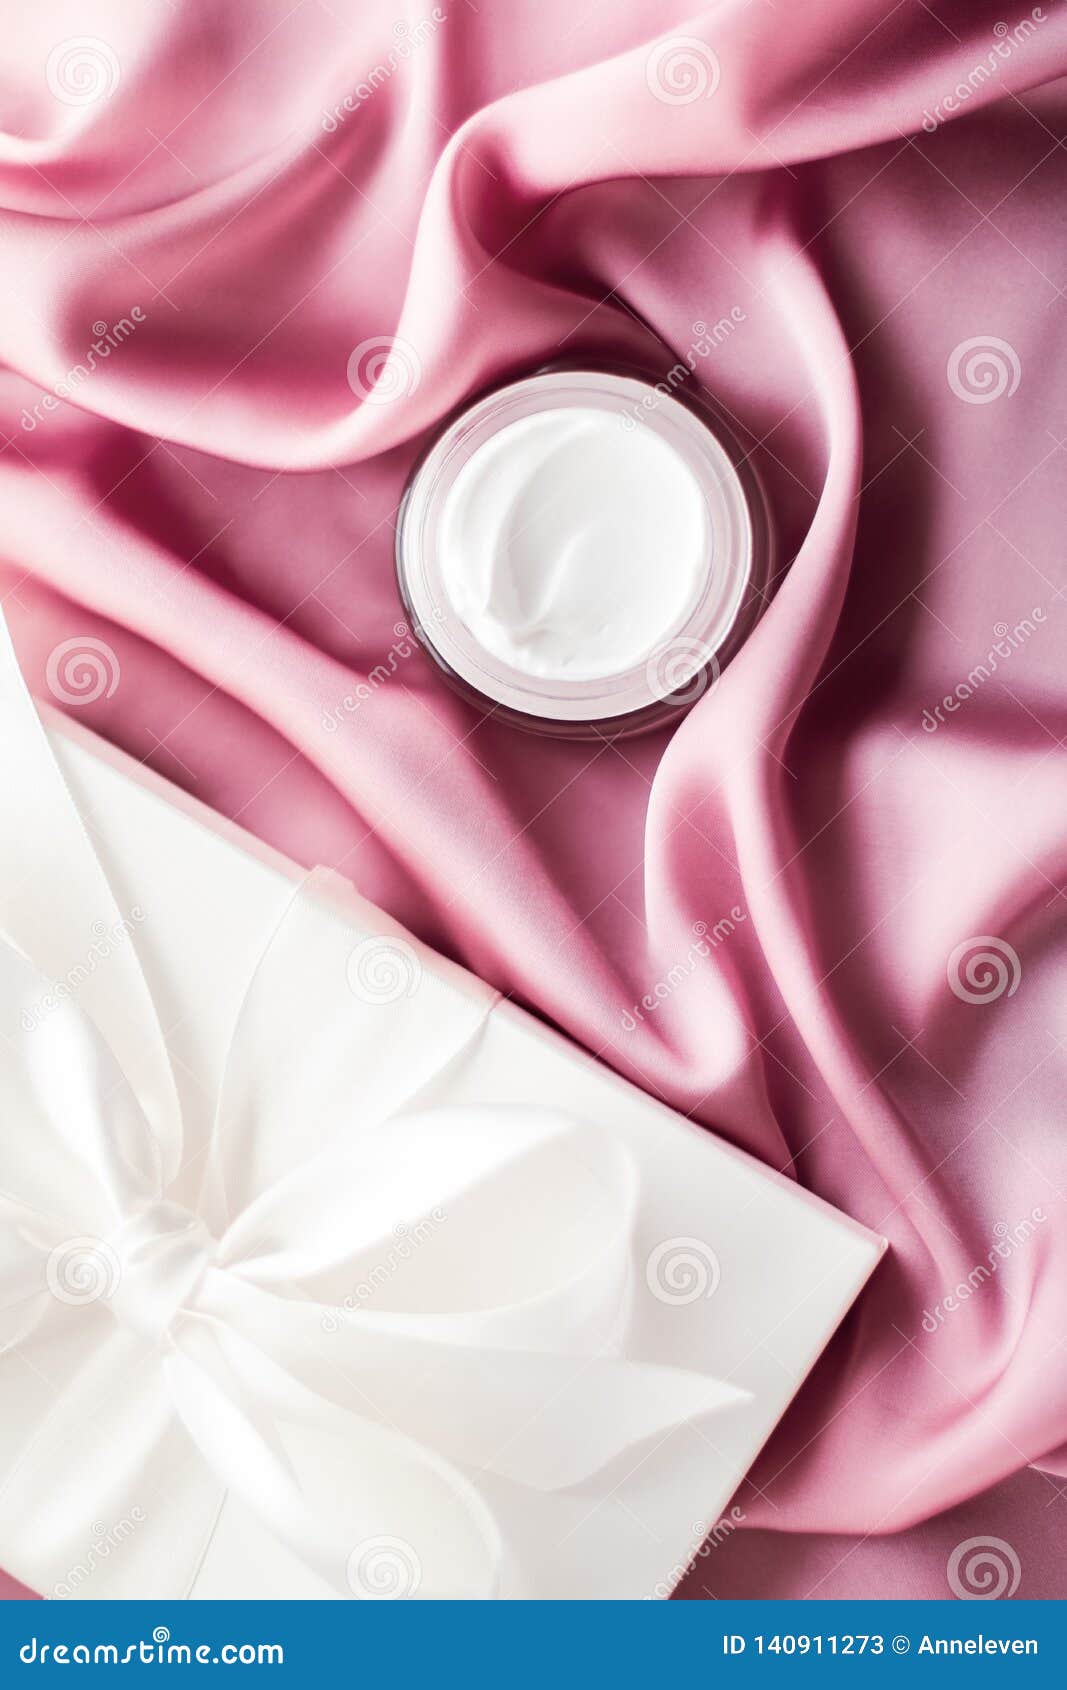 Face cream stock image. Image of open, rich, opulence - 140911273